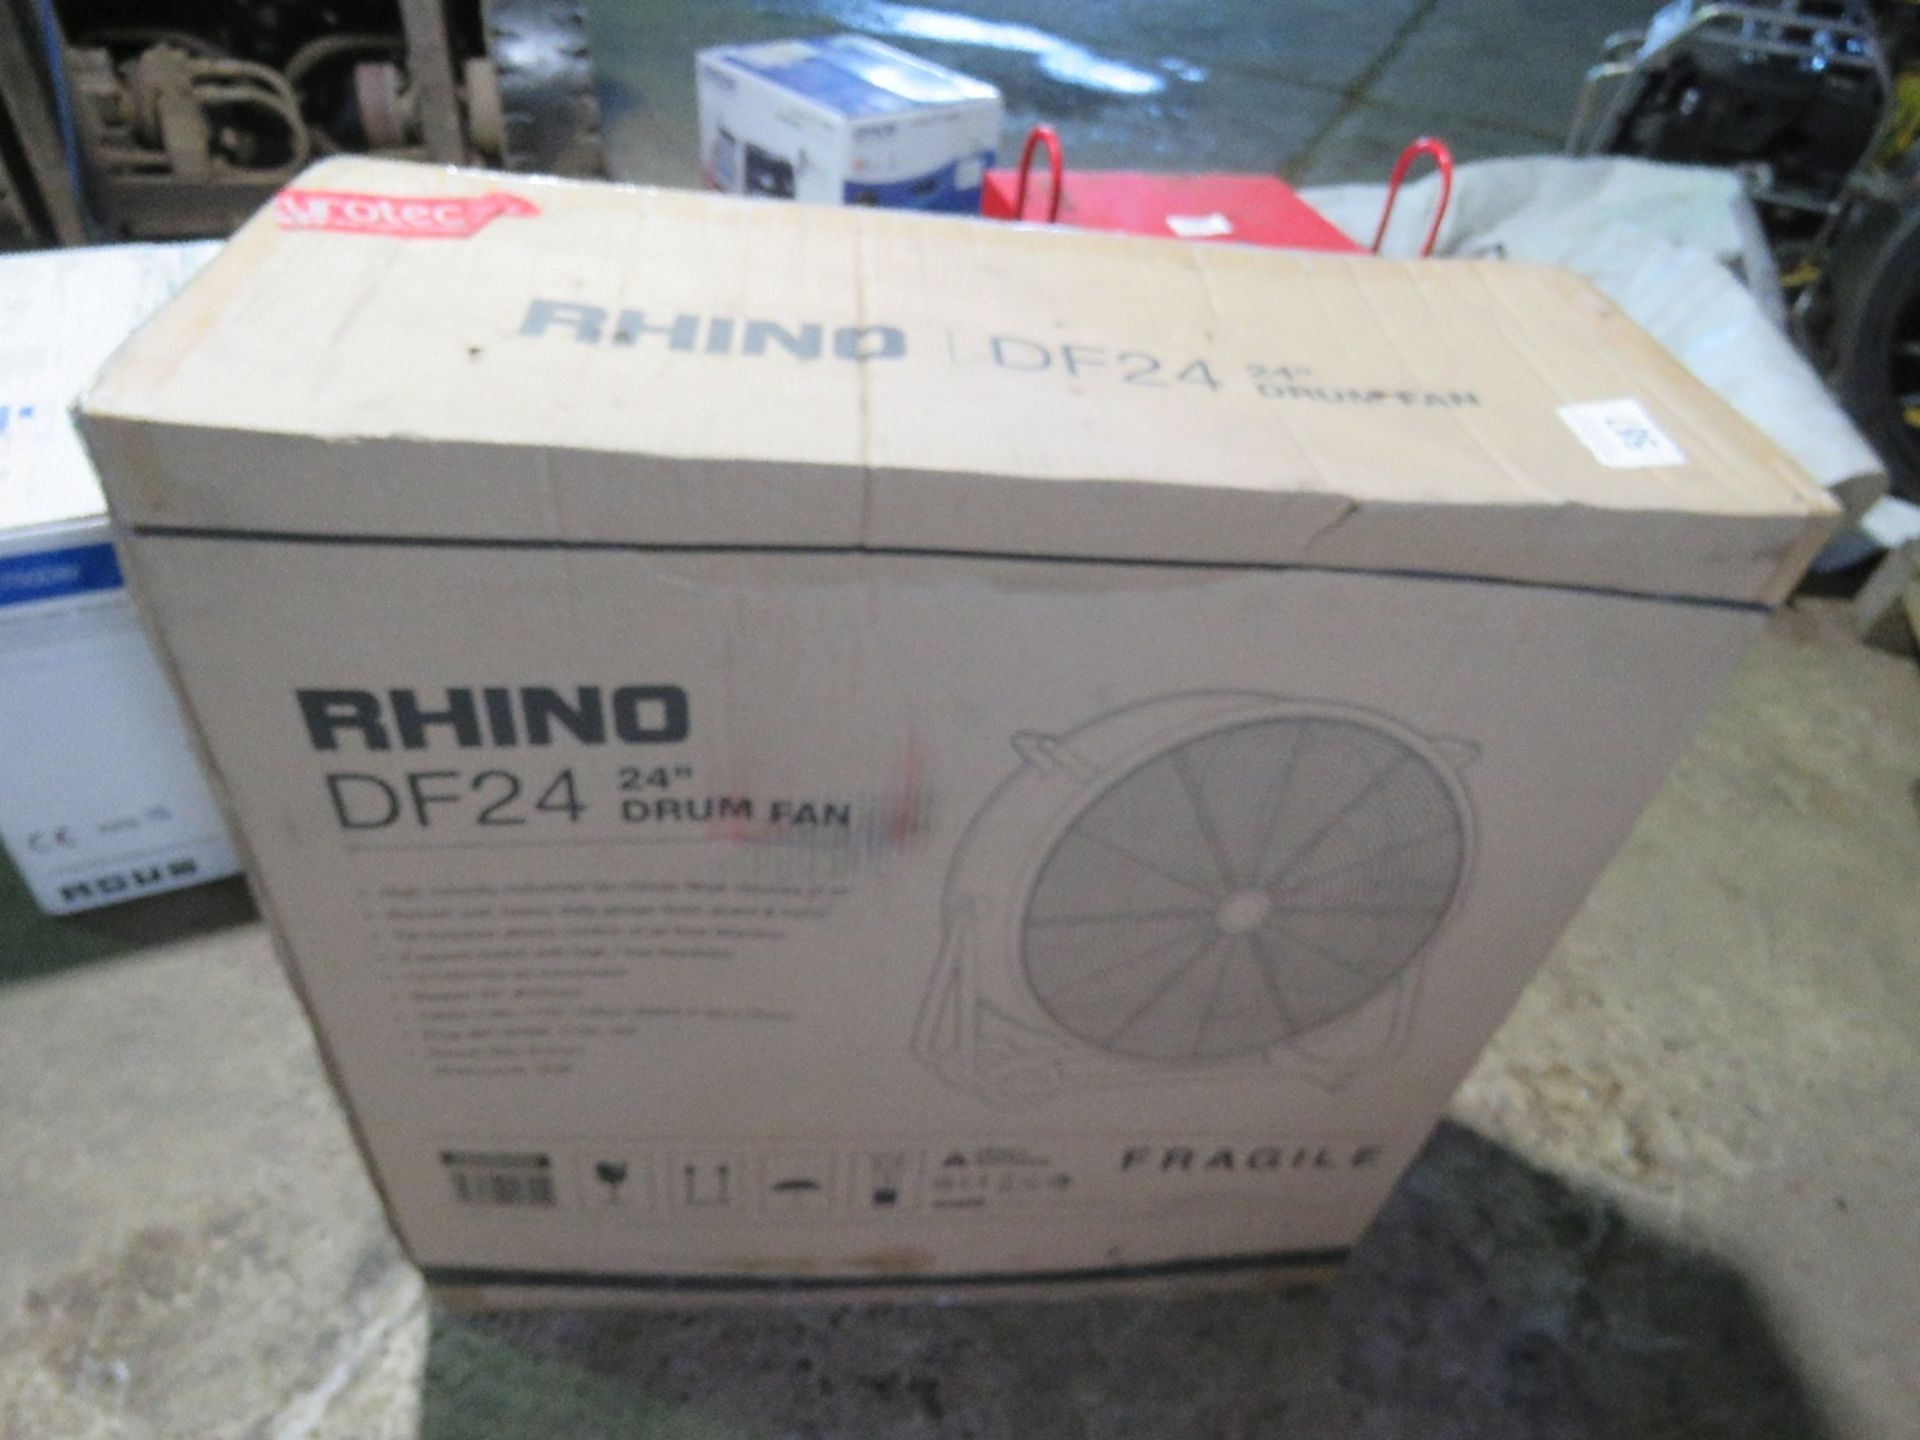 RHINO 110VOLT POWERED FAN, 24" SIZE. BOXED, UNUSED. SOURCED FROM COMPANY LIQUIDATION. - Image 2 of 2